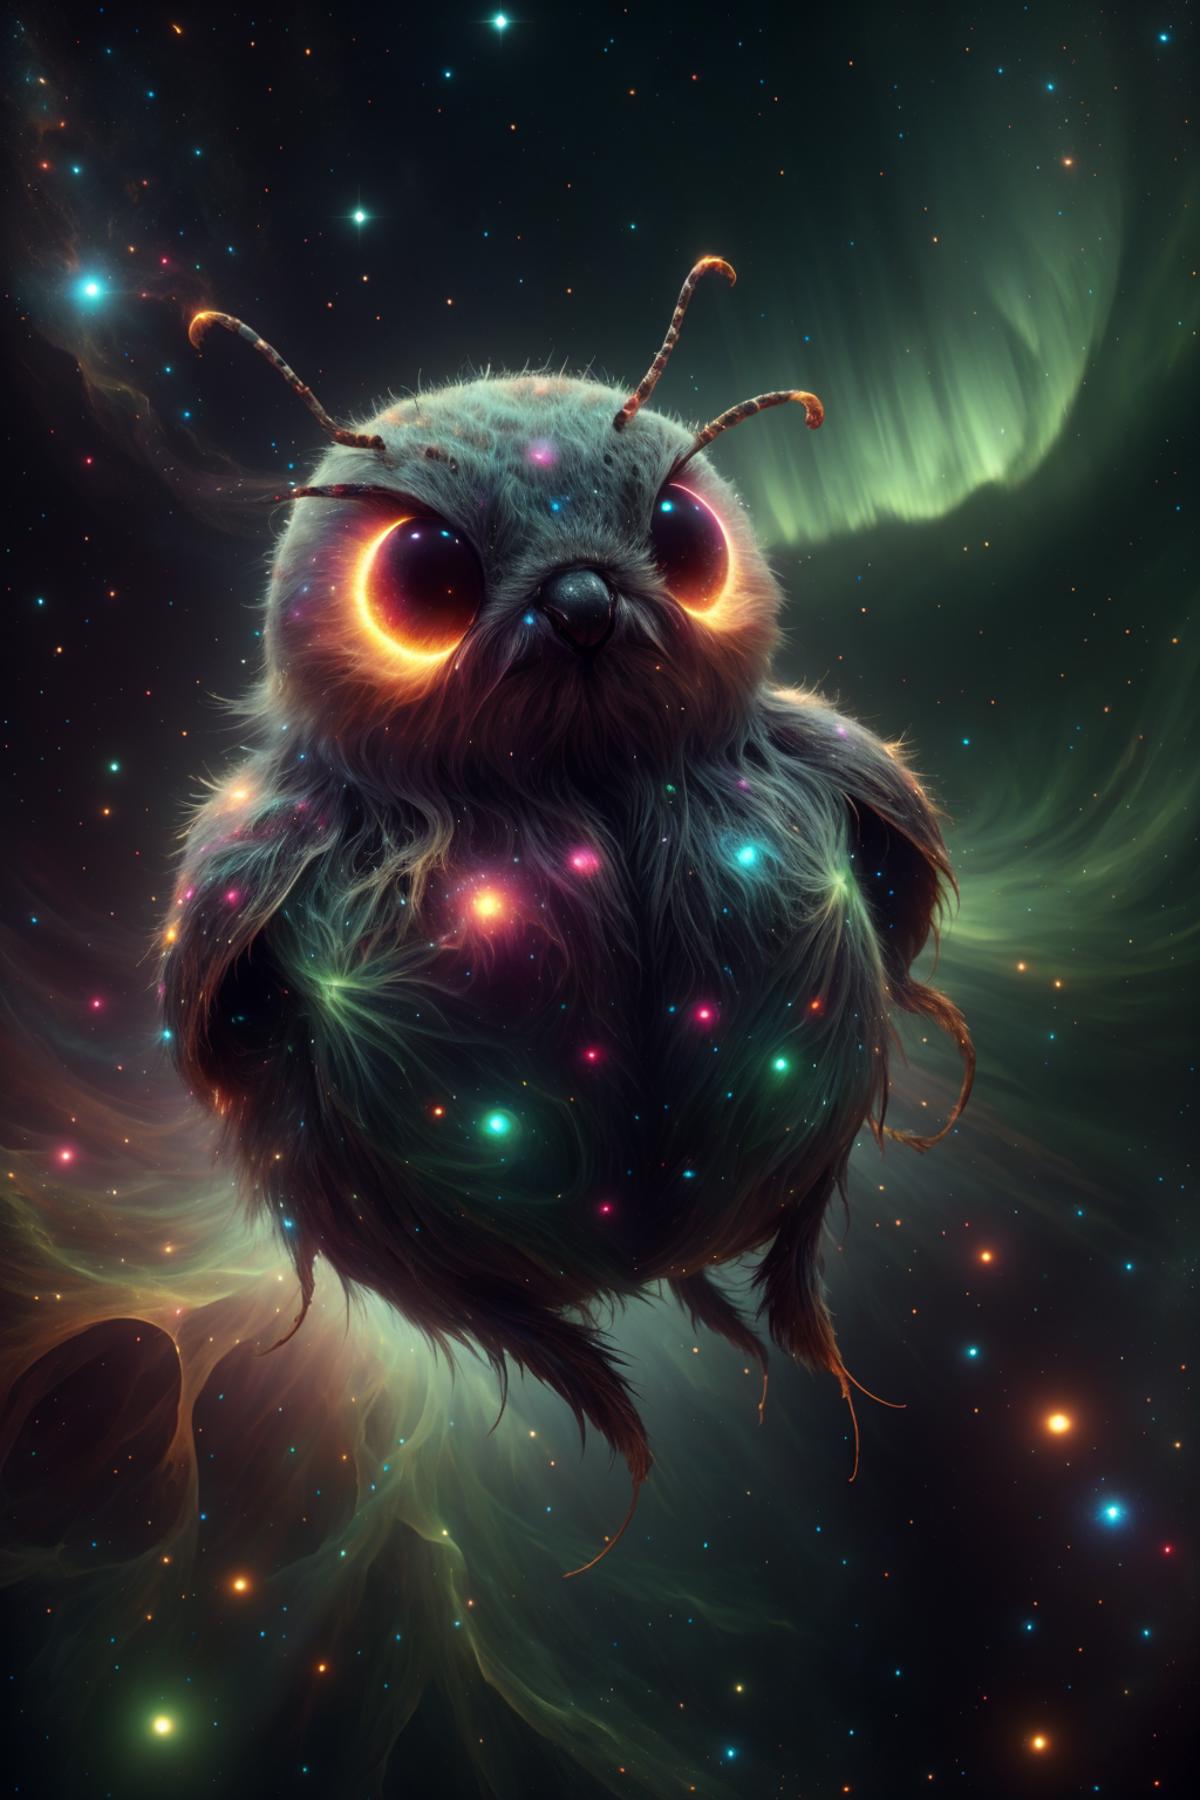 An Alien Owl with Glowing Eyes and Antennae Sits Against a Colorful Space Background